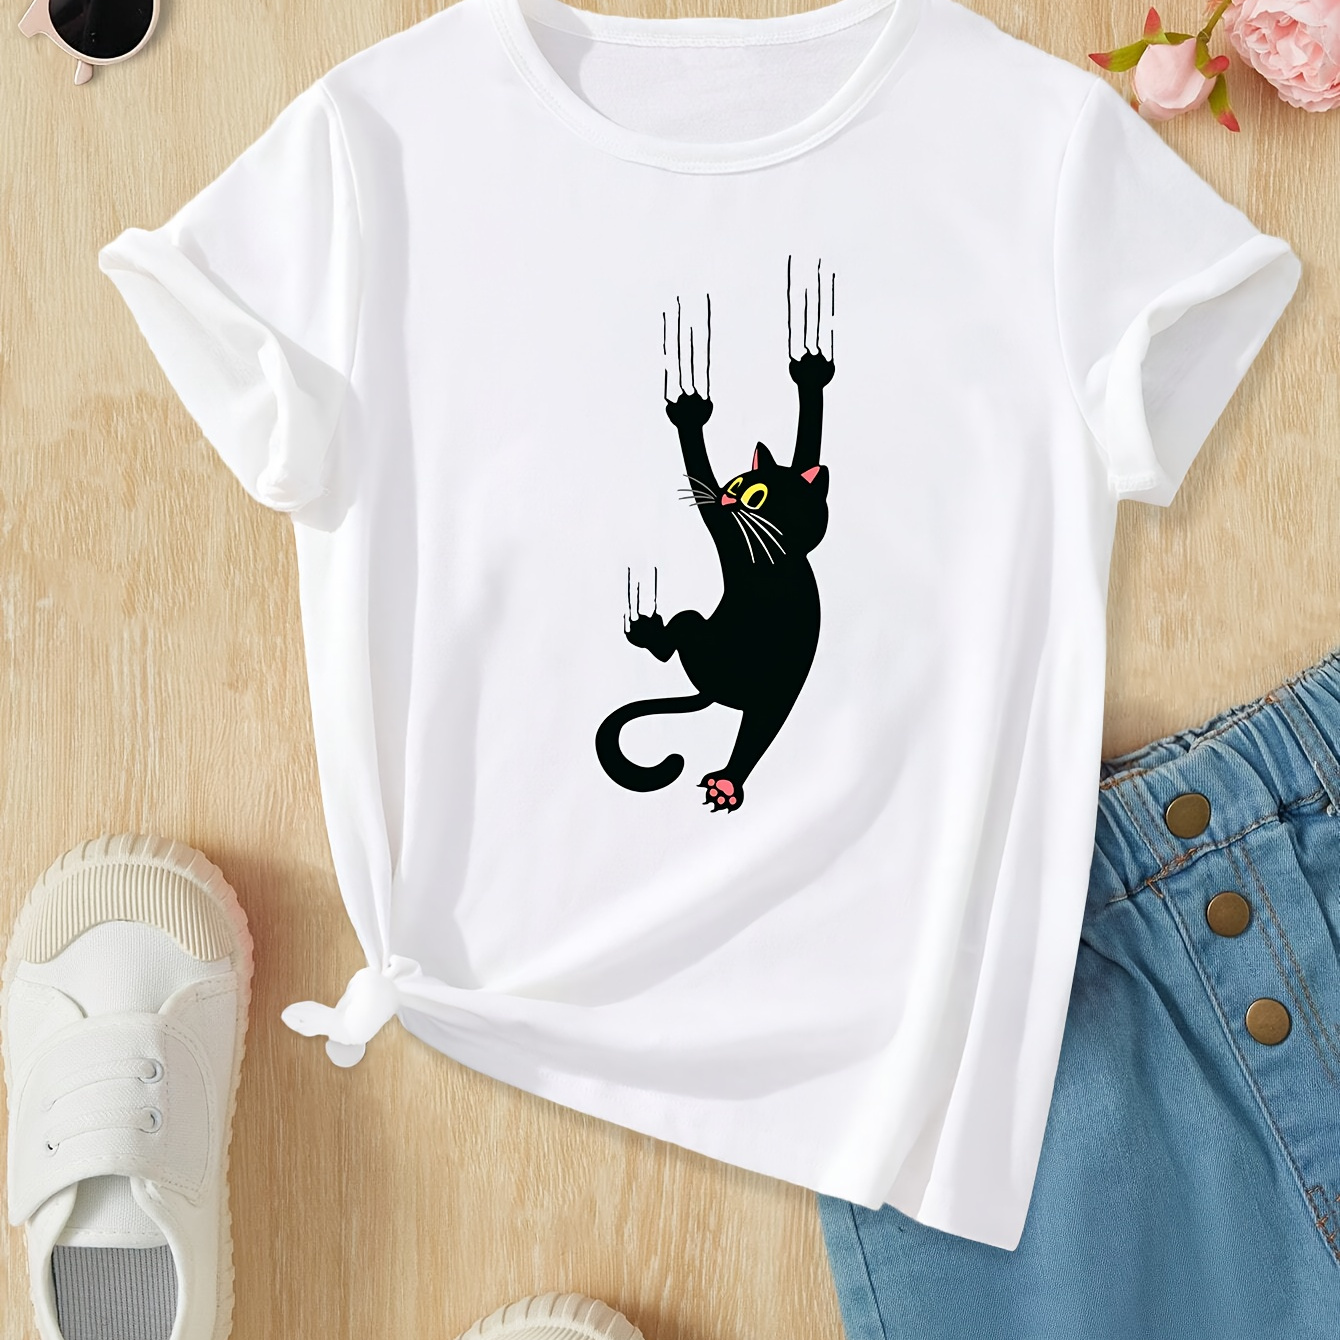 

Cartoon Black Cat With Scratches Graphic Print Tee, Girls' Casual & Trendy Crew Neck Short Sleeve T-shirt For Spring & Summer, Girls' Clothes For Everyday Life